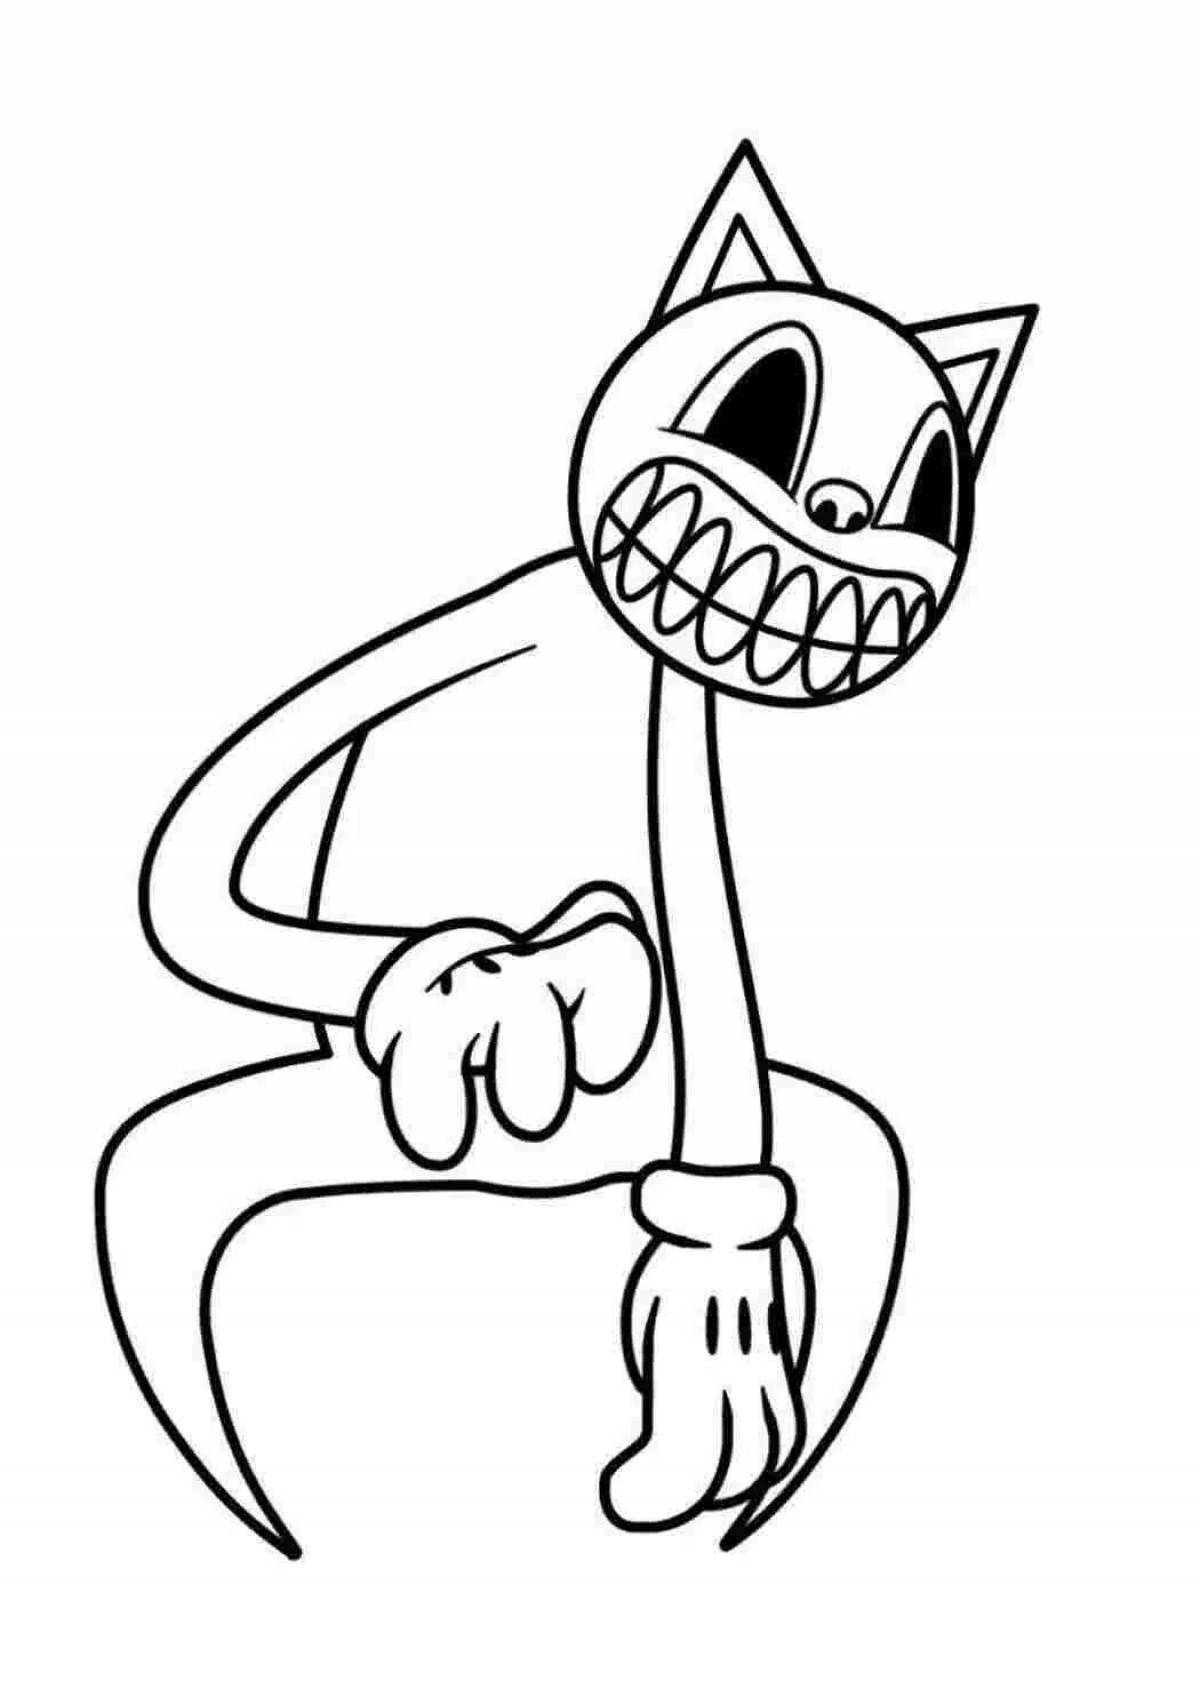 Amazing cartunkette coloring page